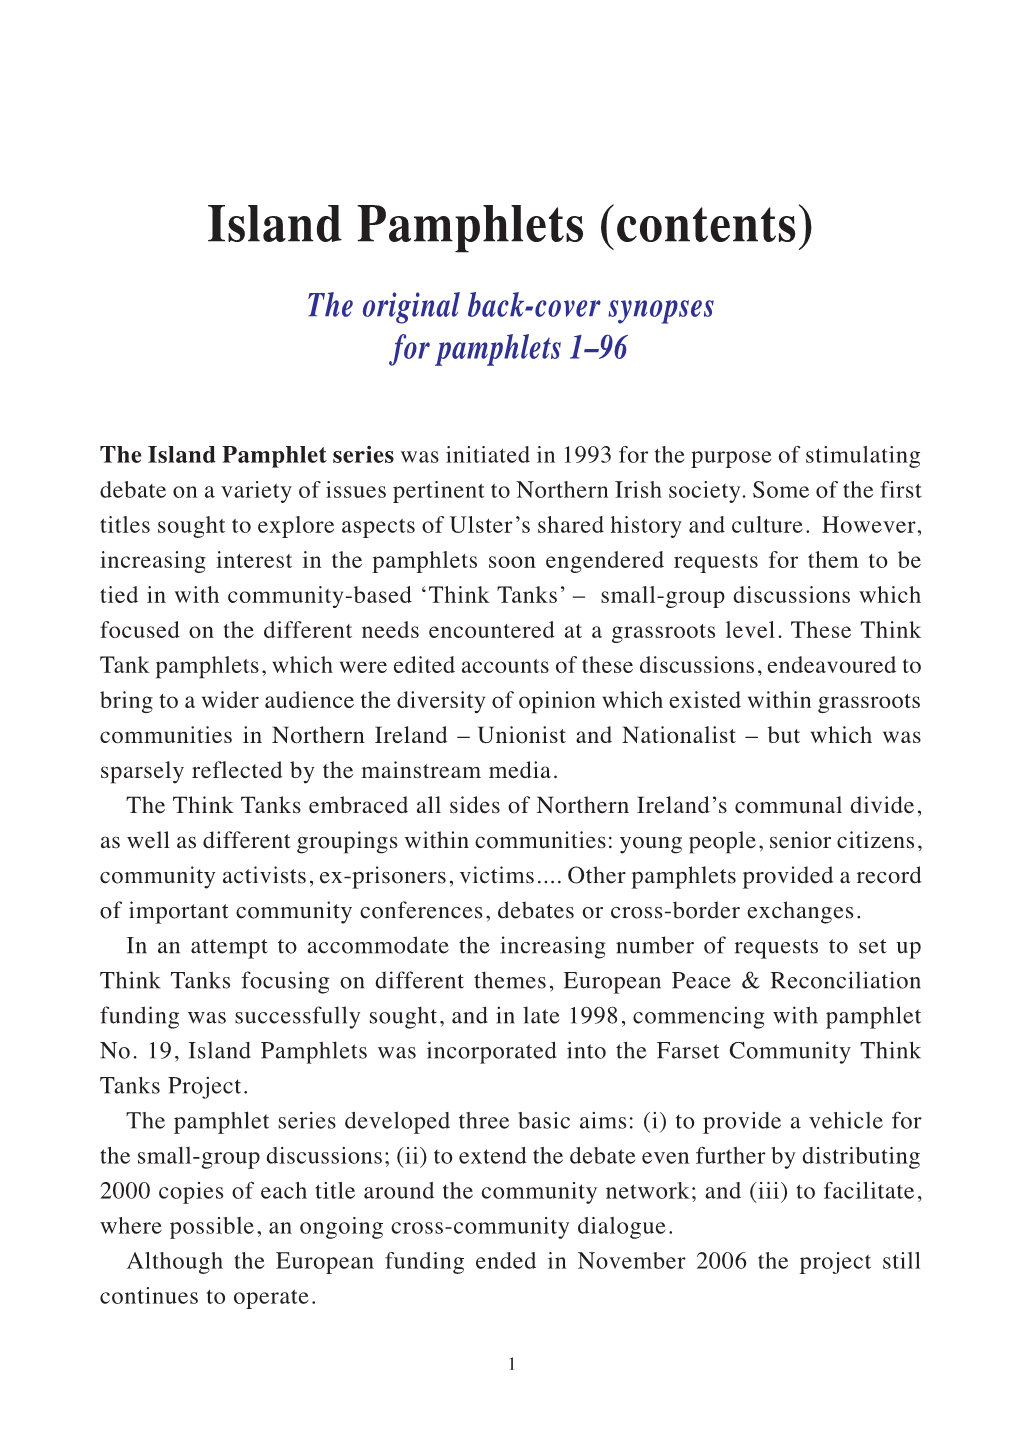 Island Pamphlets (Contents) the Original Back-Cover Synopses for Pamphlets 1–96